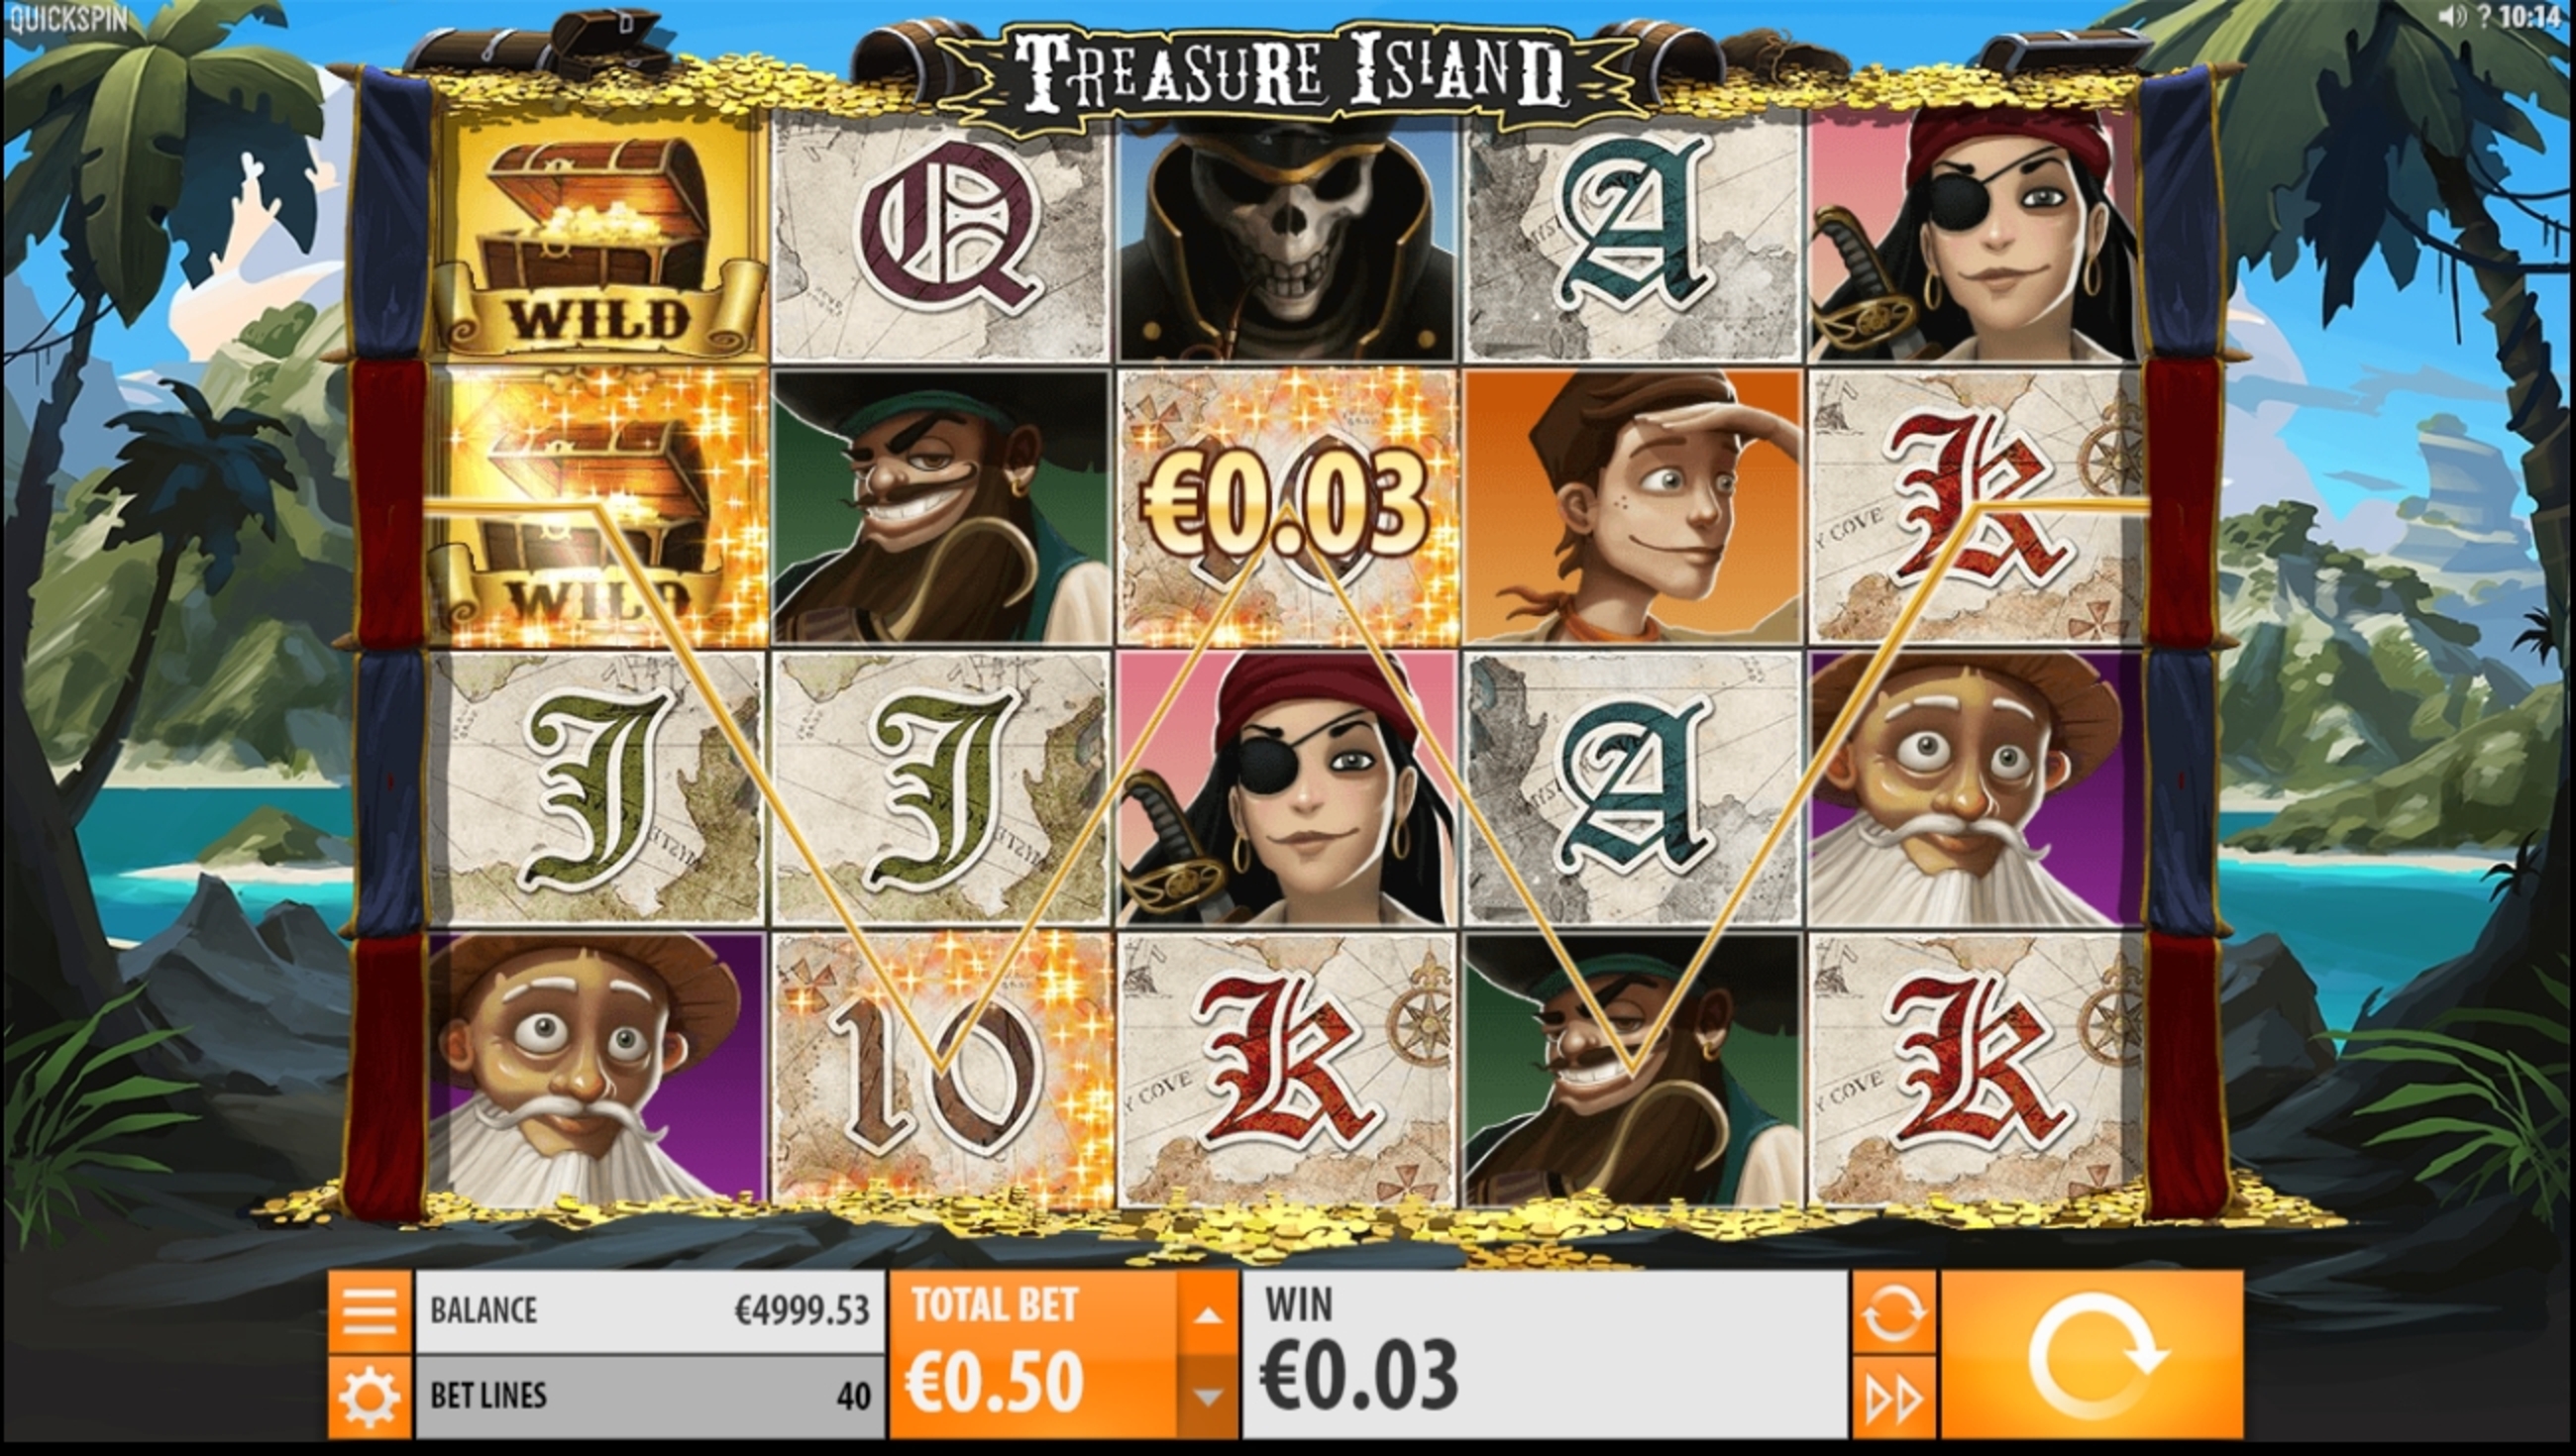 Win Money in Treasure Island Free Slot Game by Quickspin